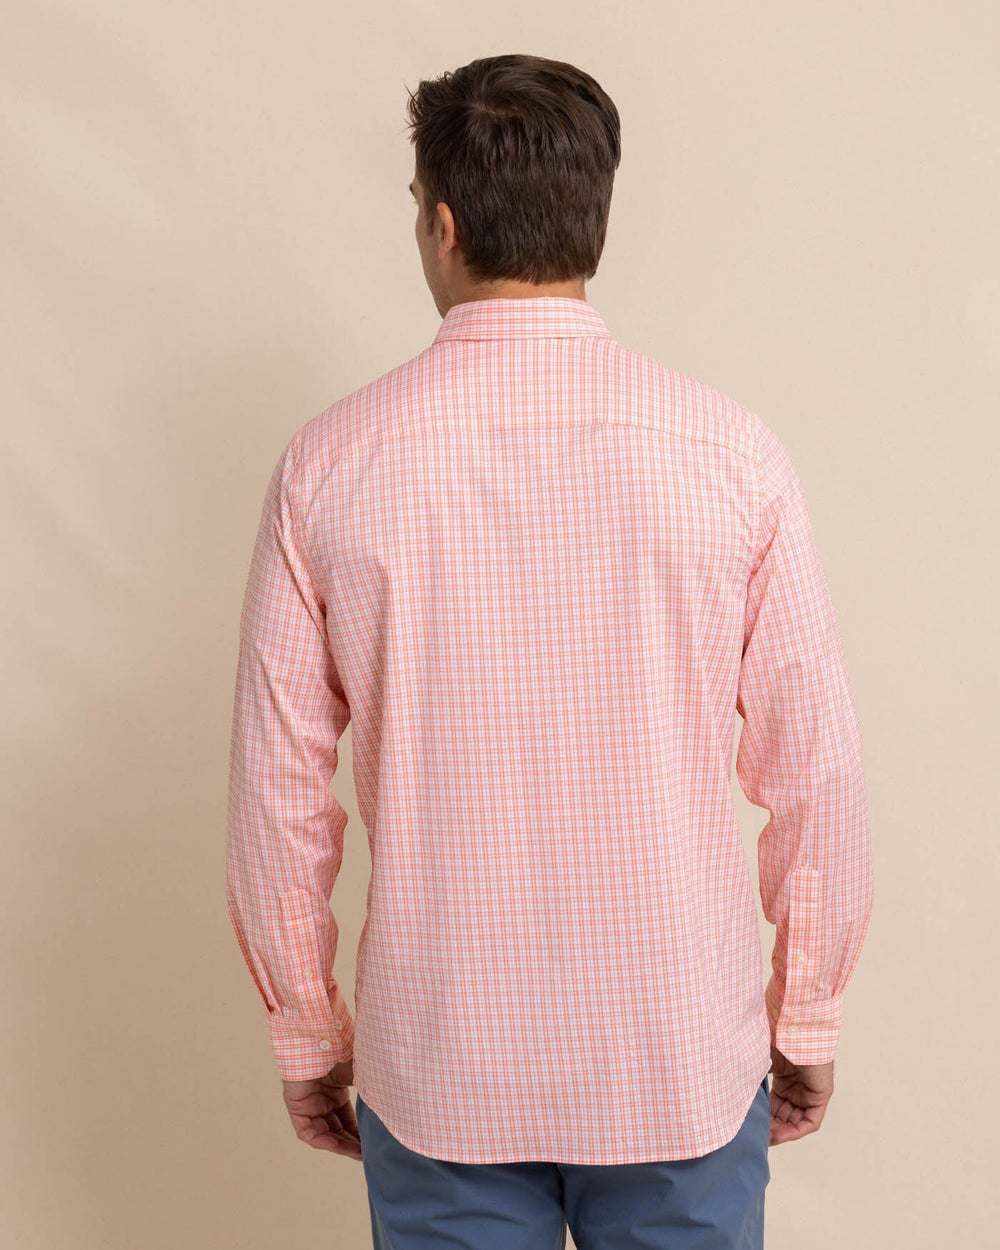 The back view of the Southern Tide brrr Intercoastal Poinsett Plaid Long Sleeve Sport Shirt by Southern Tide - Desert Flower Coral